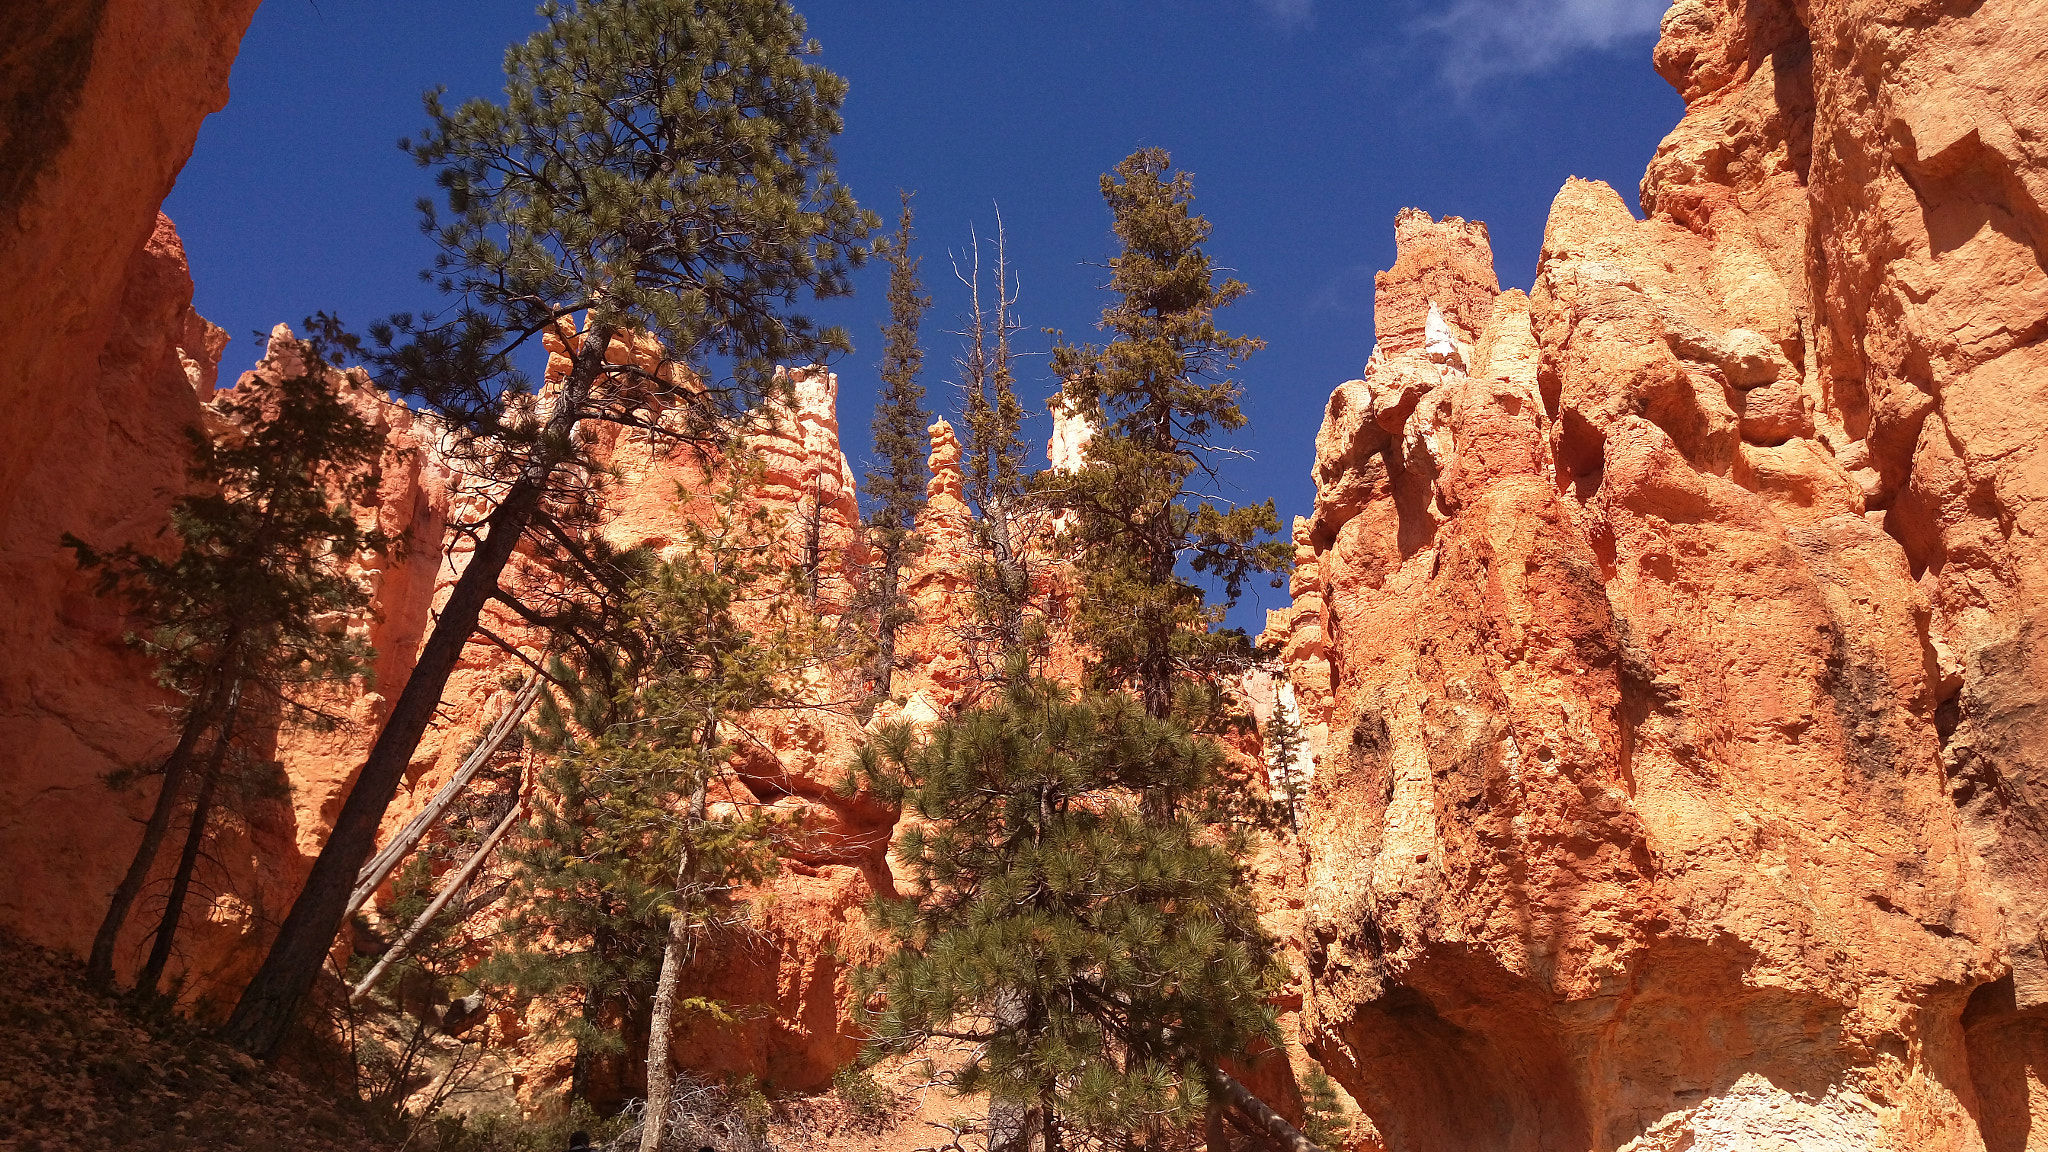 HTC ONE M9+ sample photo. Bryce canyon photography